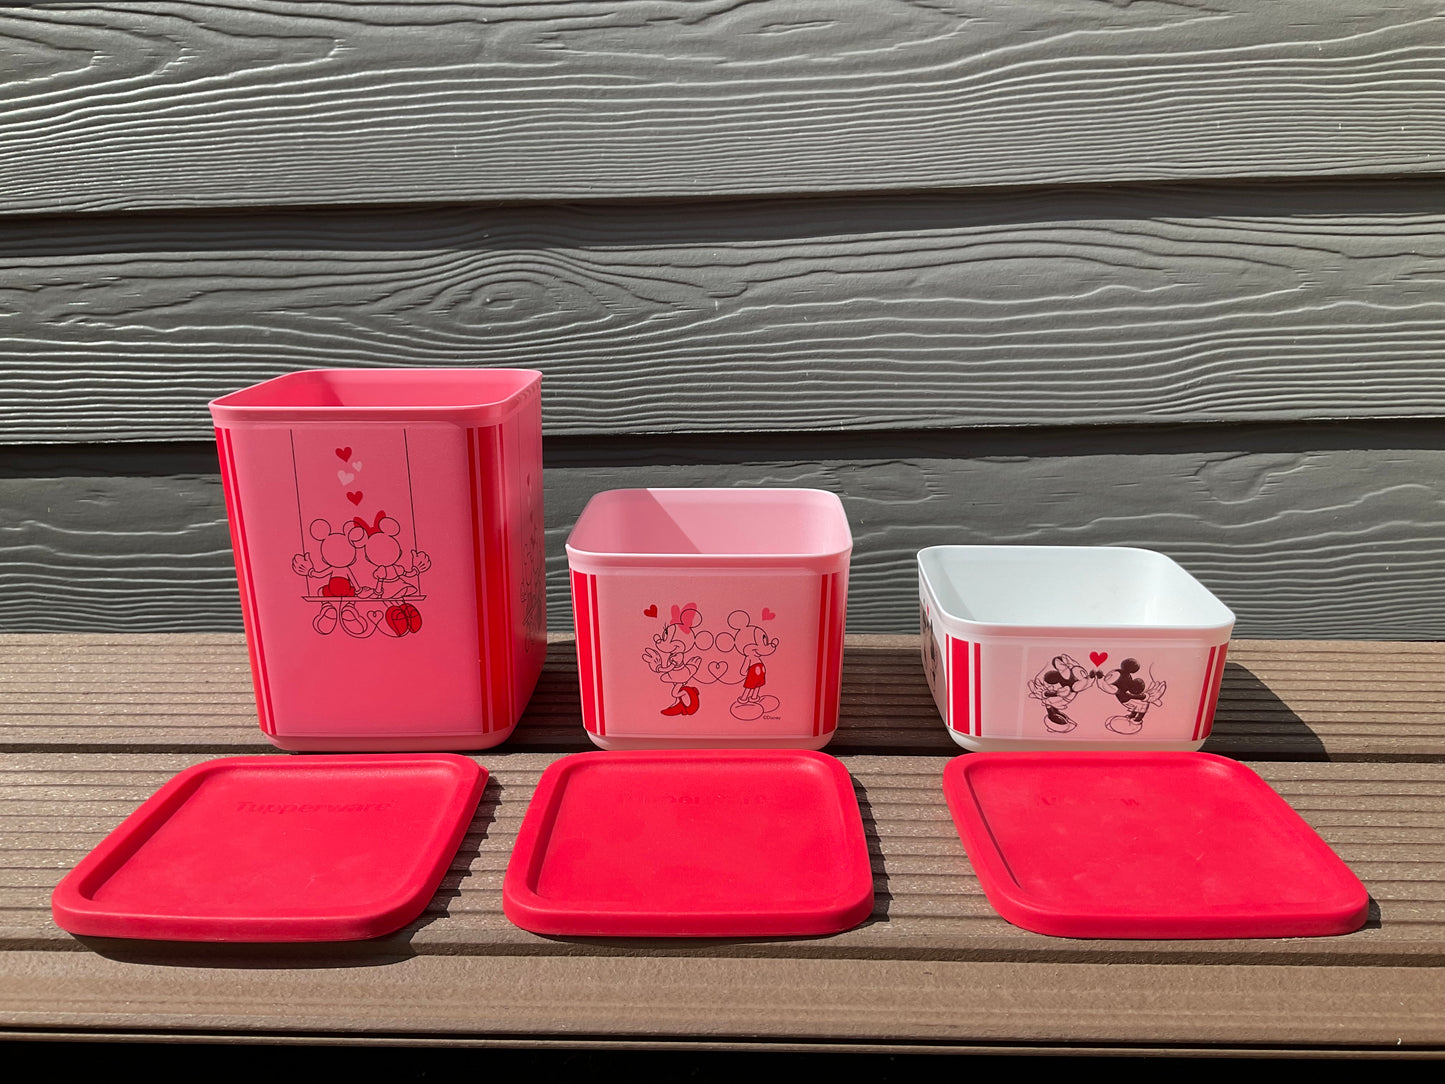 Tupperware Cubix Mickey Mouse